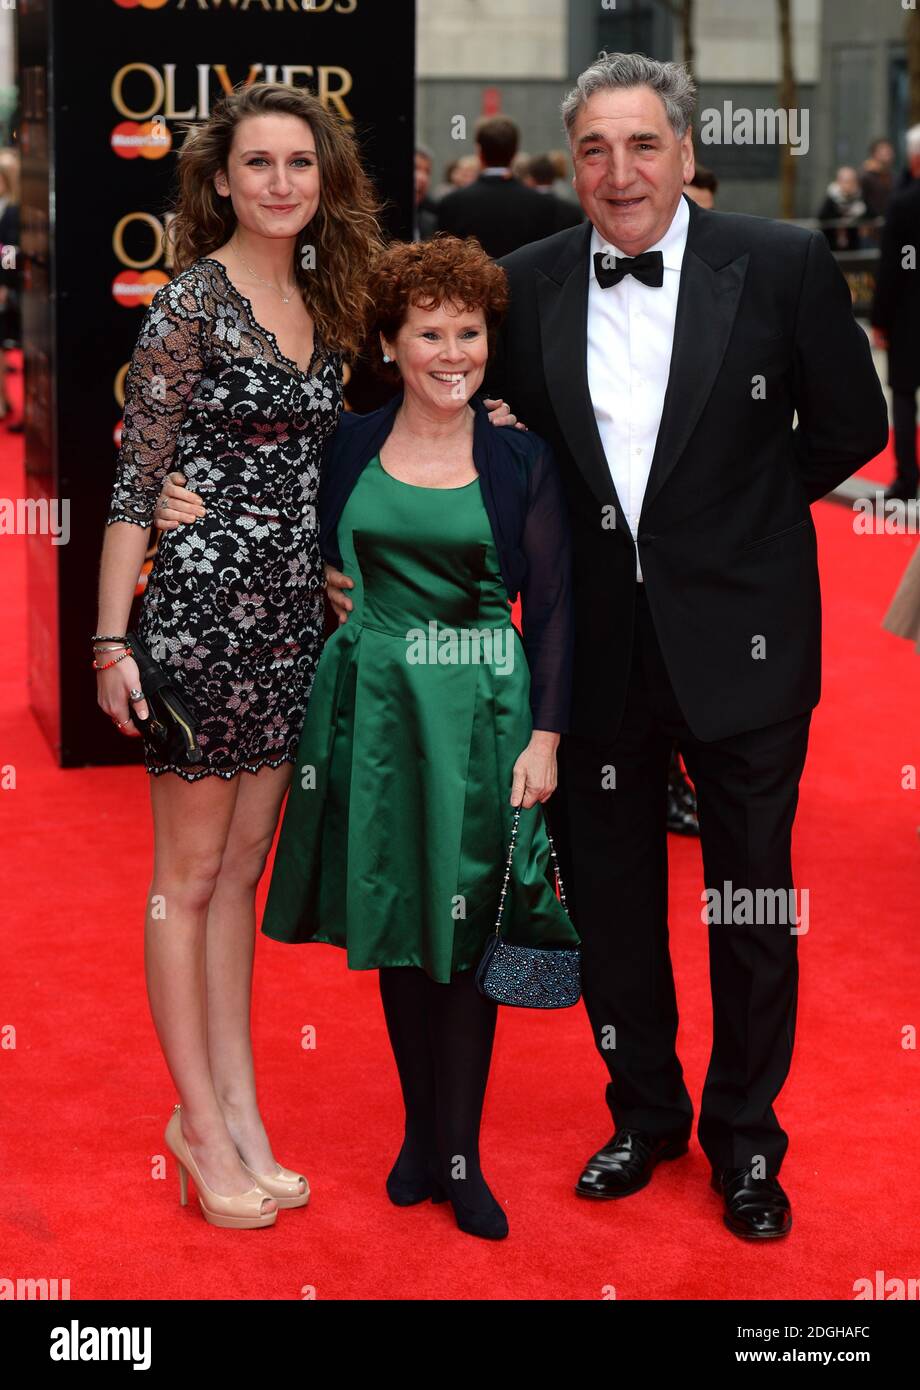 Imelda Staunton, Jim Carter and daughter arriving at the Olivier Awards 2013, Royal Opera House, Covent Garden, London. Stock Photo